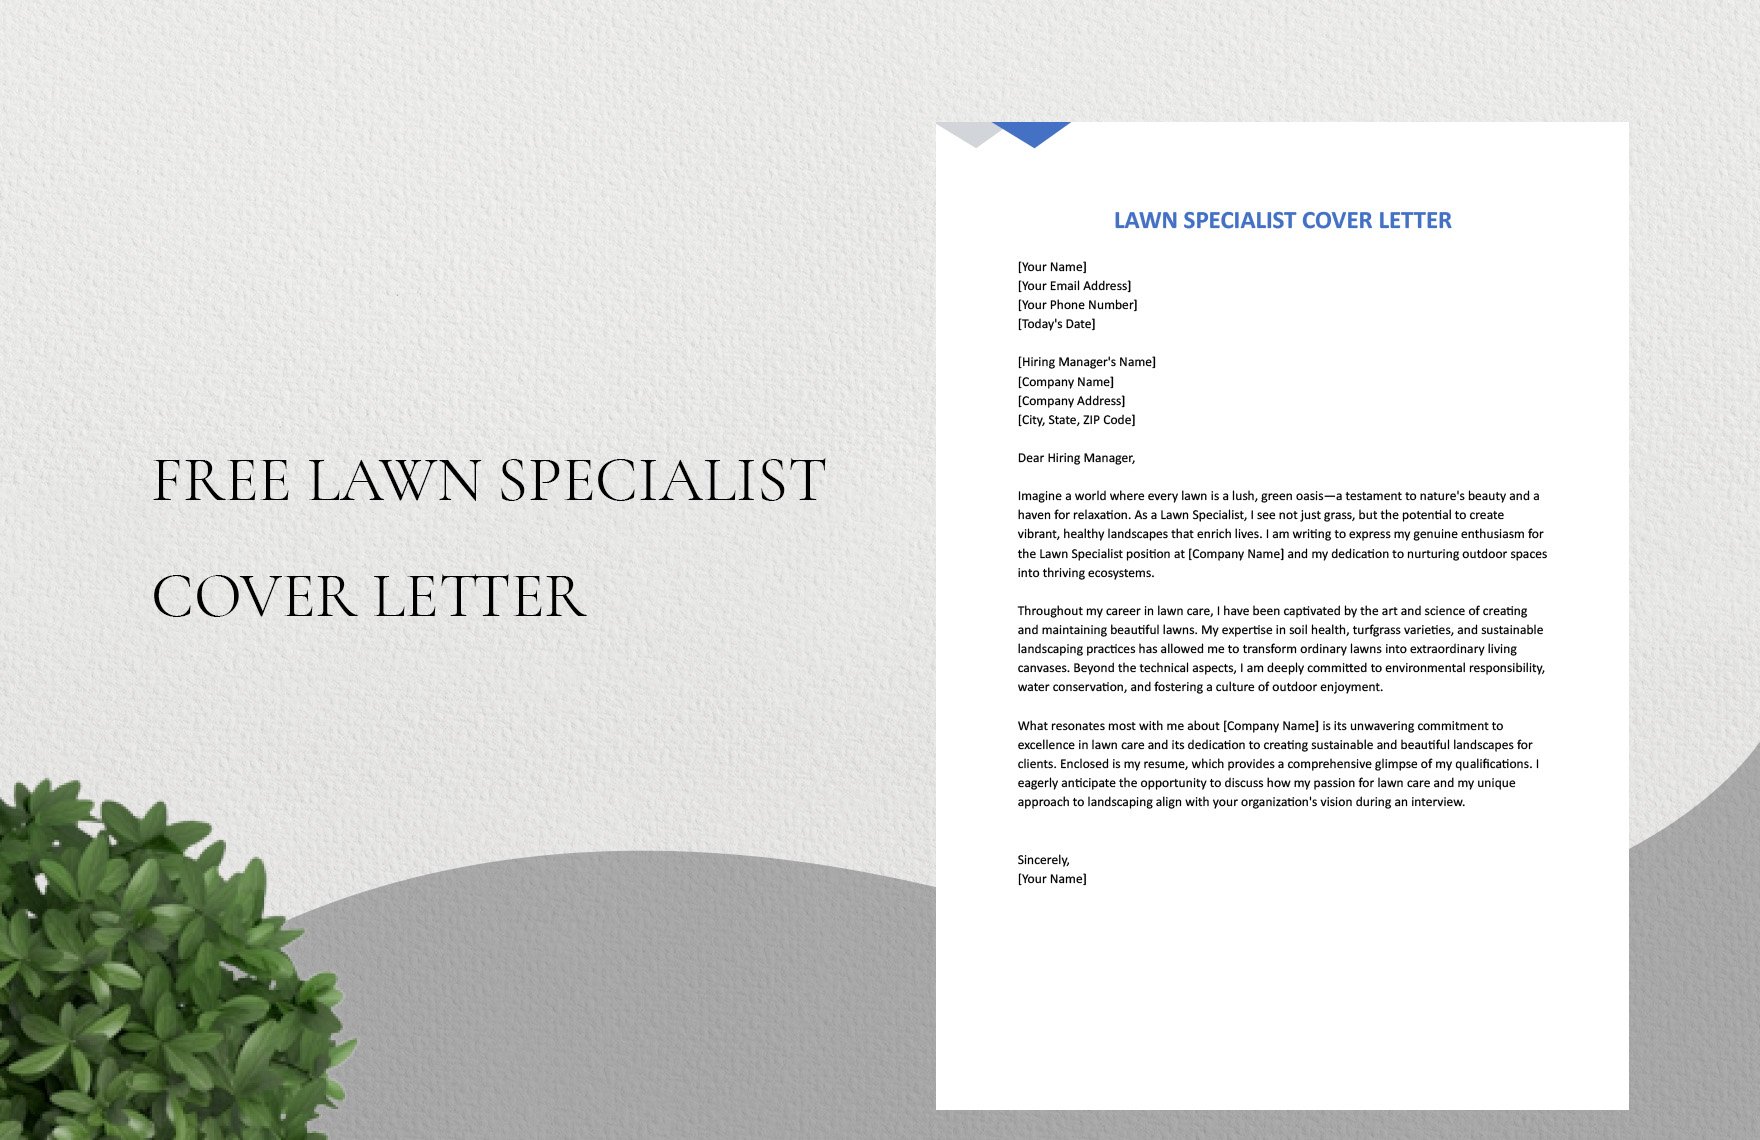 Lawn Specialist Cover Letter in Word, Google Docs